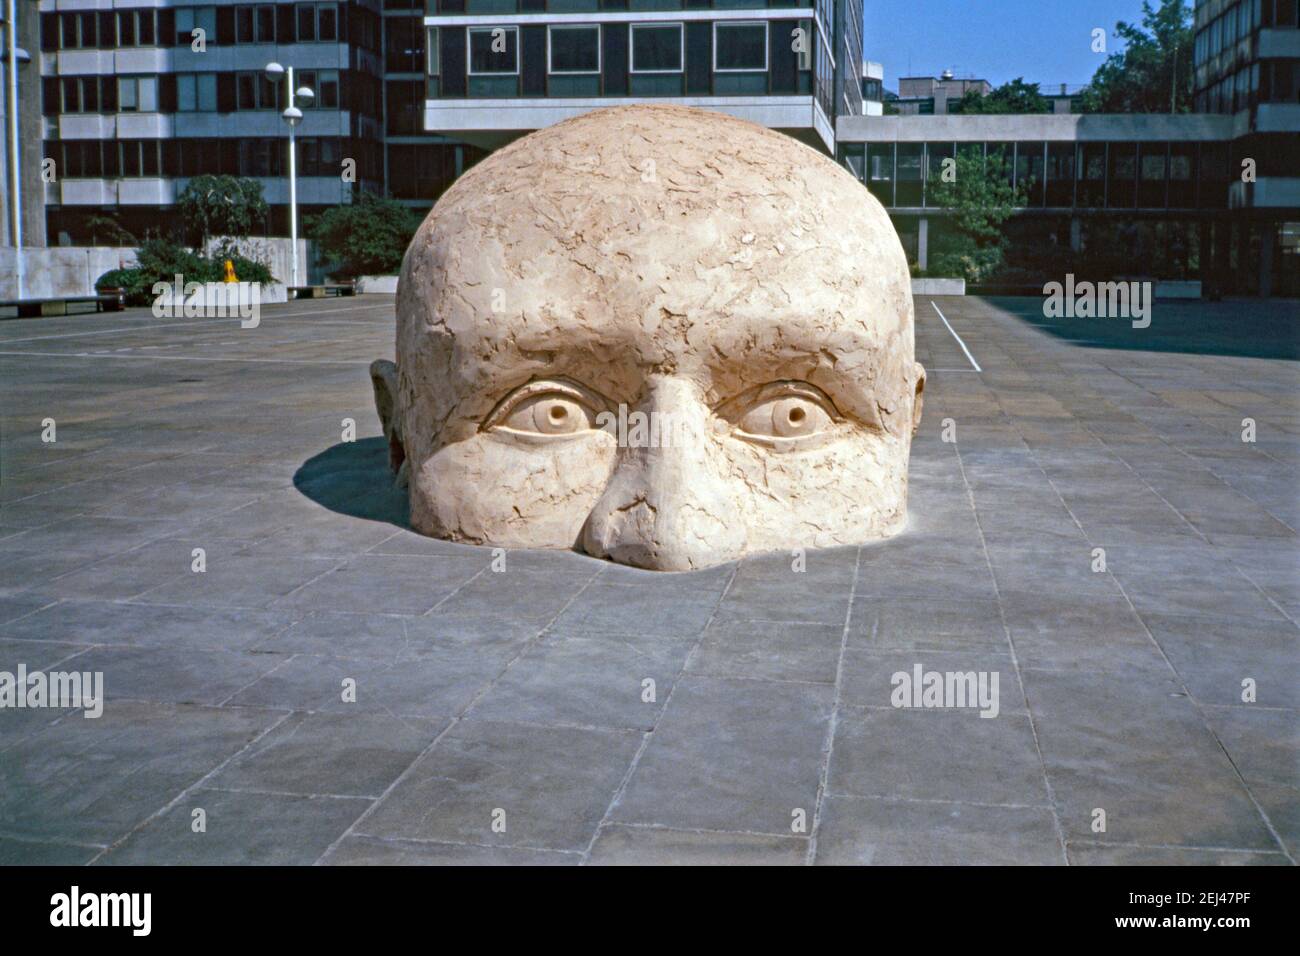 A 1993 sculpture, part of a work called ‘Man’, in Paternoster Square, City of London, England, UK 1993. Collaborating on the sculpture, built onsite were sculptors Alexander Macgregor and Richard Clark. This was part of 1993’s ‘Art in the City’ and was aimed at setting sculpture amongst the green spaces and the distinctive architecture of the City of London. Stock Photo